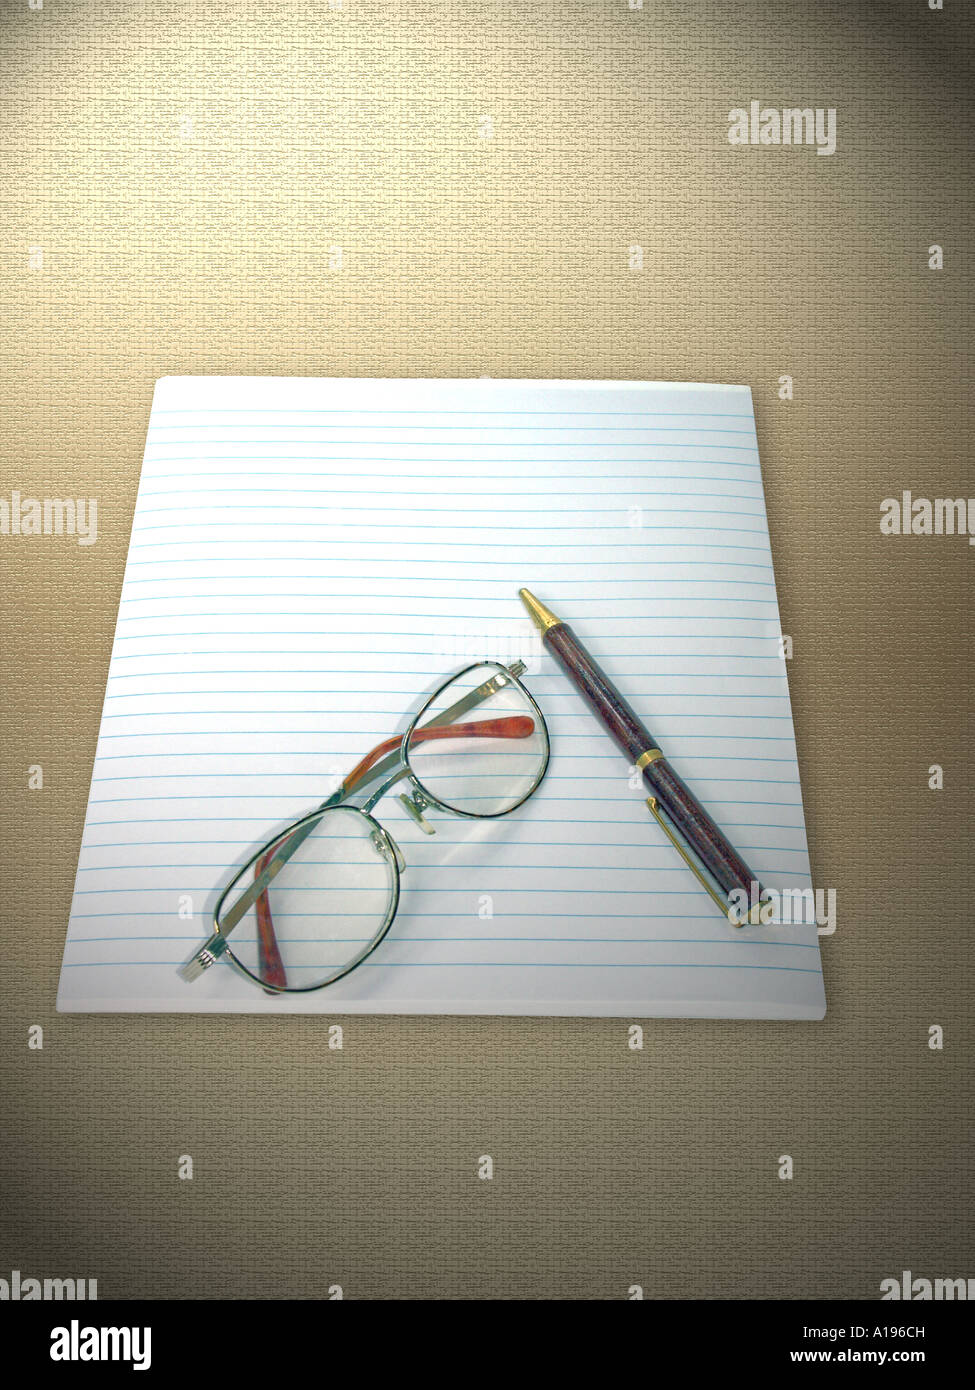 A pad of lined writing paper, reading glasses, and a ballpoint pen on a light patterned fabric background Stock Photo